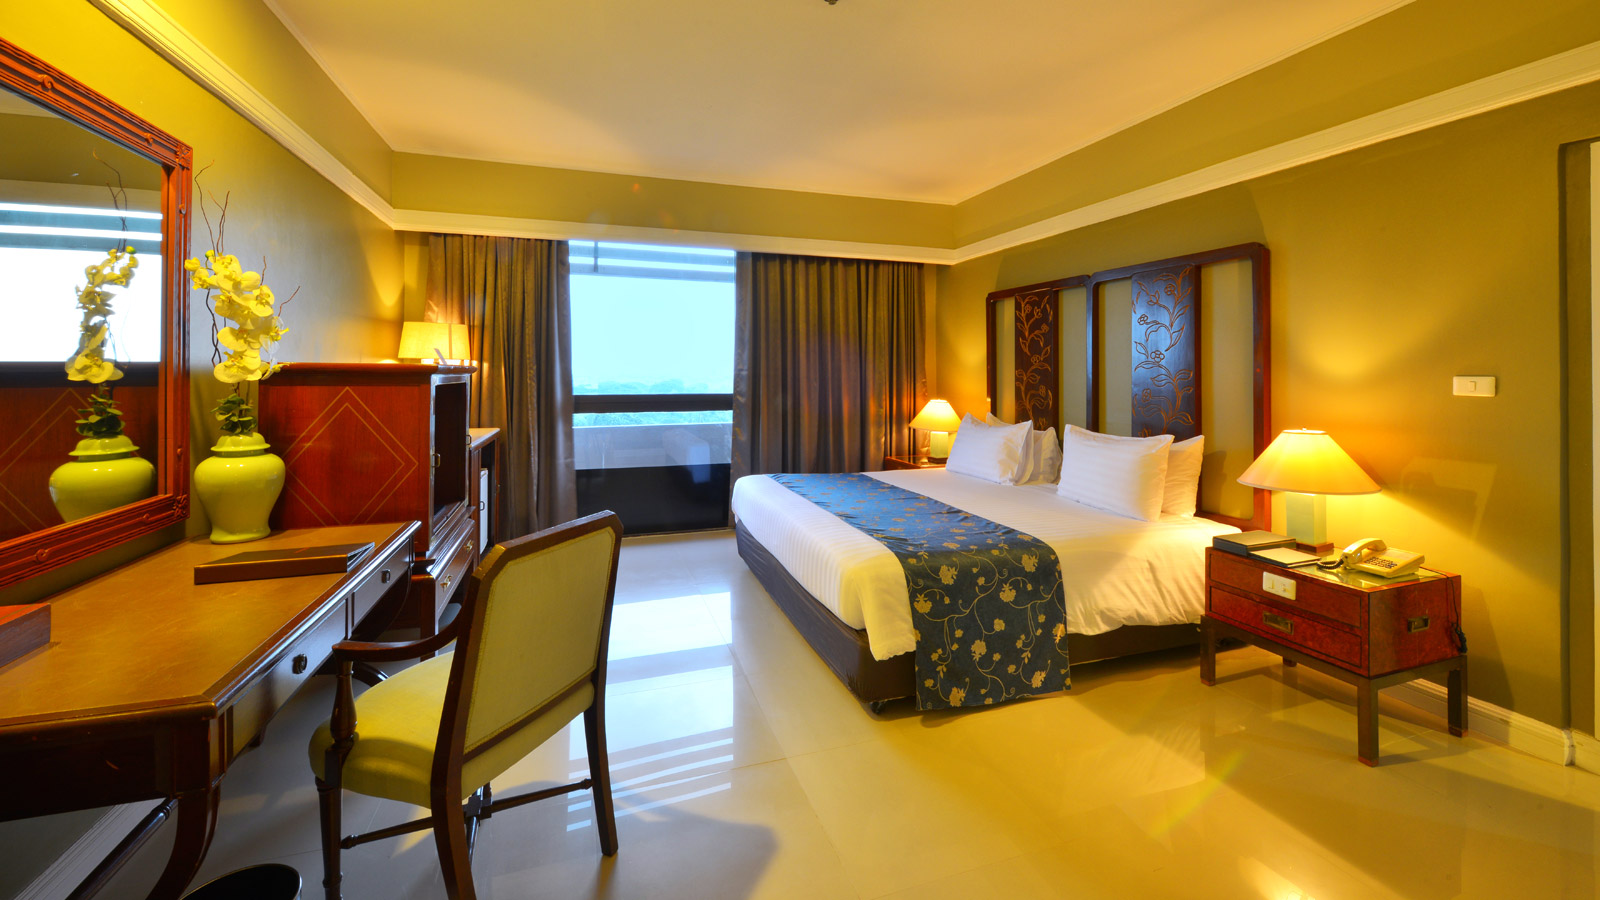 Executive Suites at Loei Palace Hotel - 黎府宫殿酒店